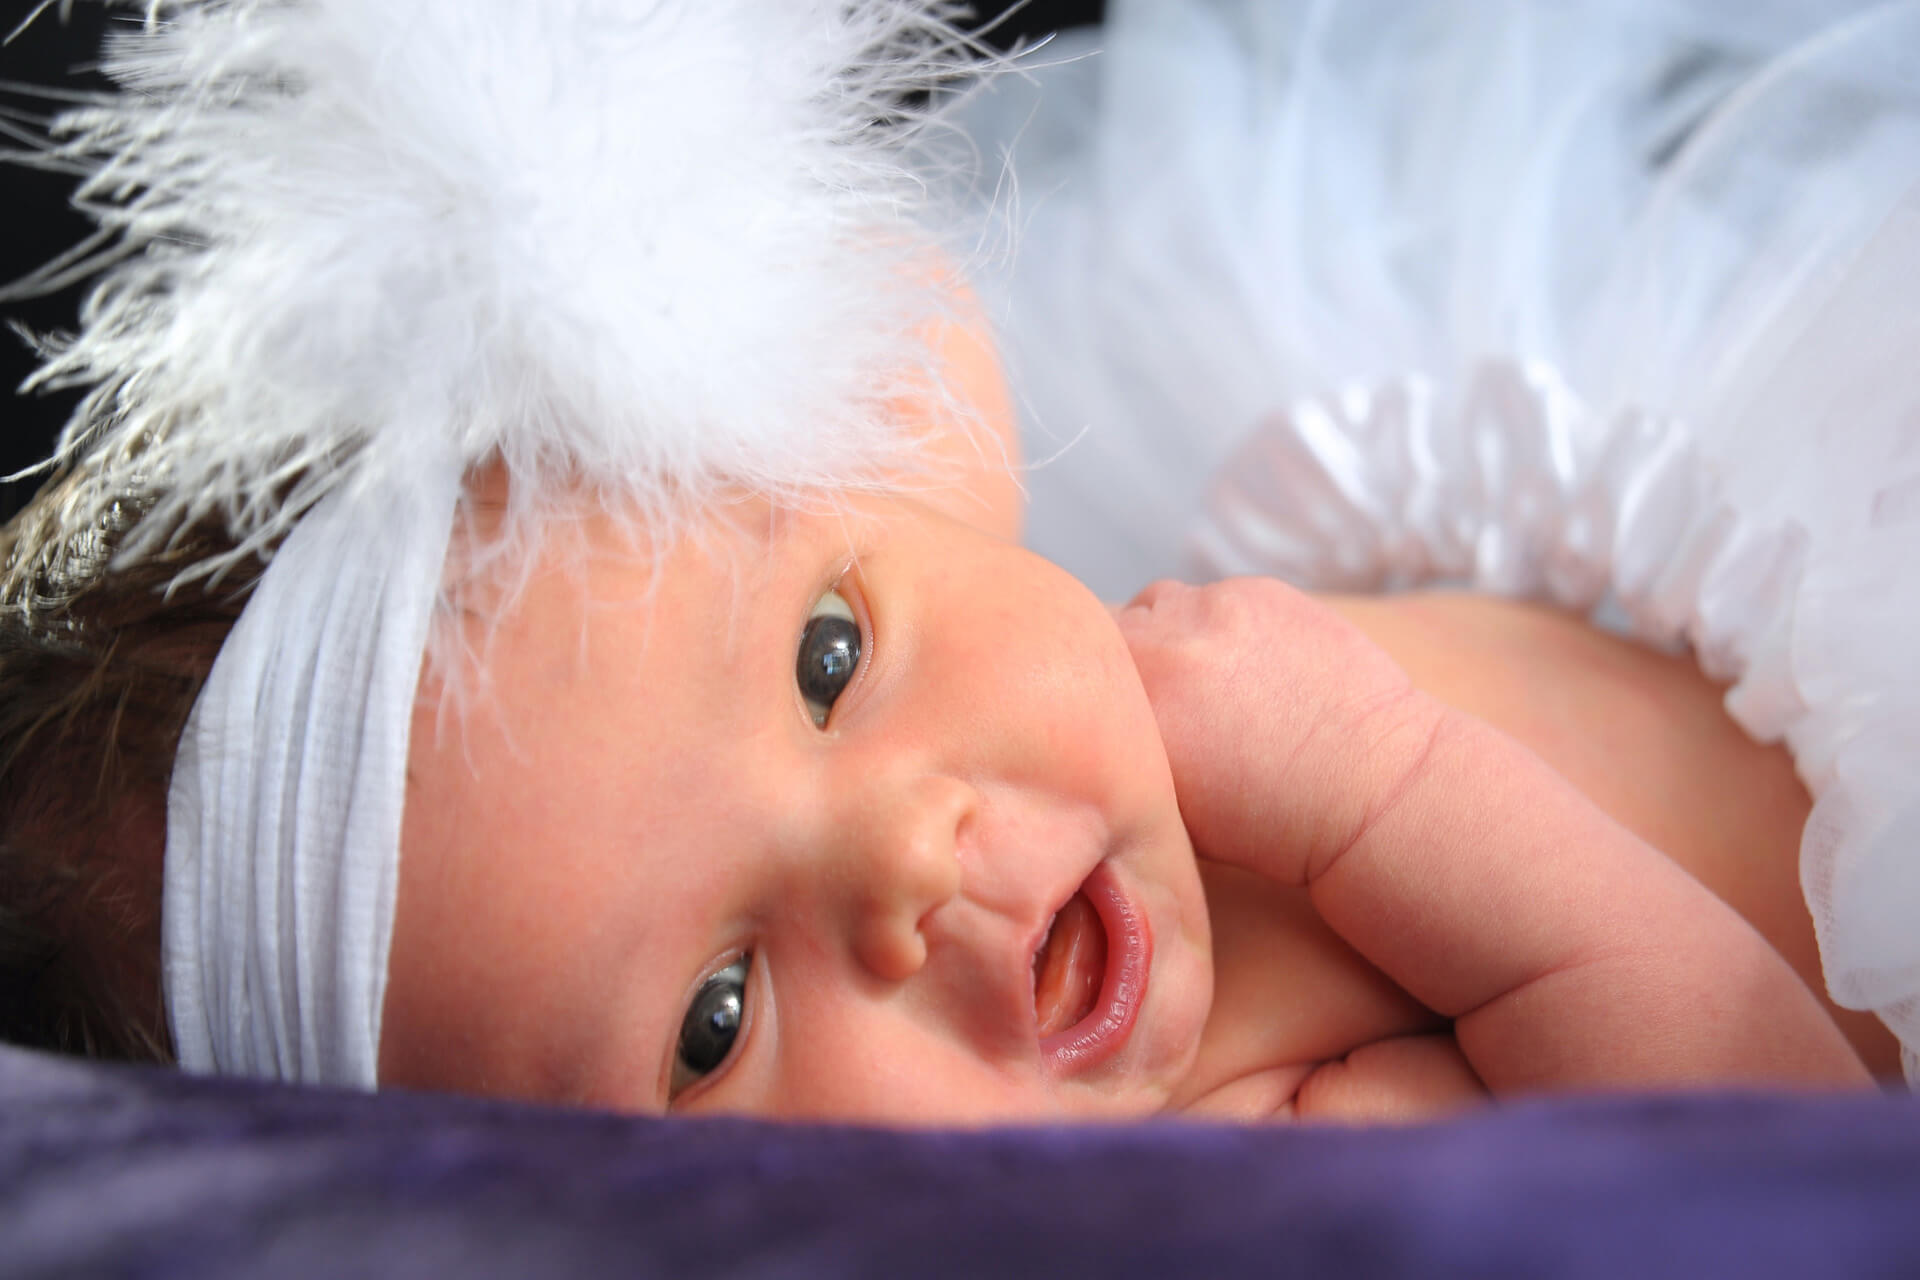 Best Detroit baby photographer' blends classic newborn photography sessions with lots of fun like this flapper baby in the metro Detroit, Michigan area.